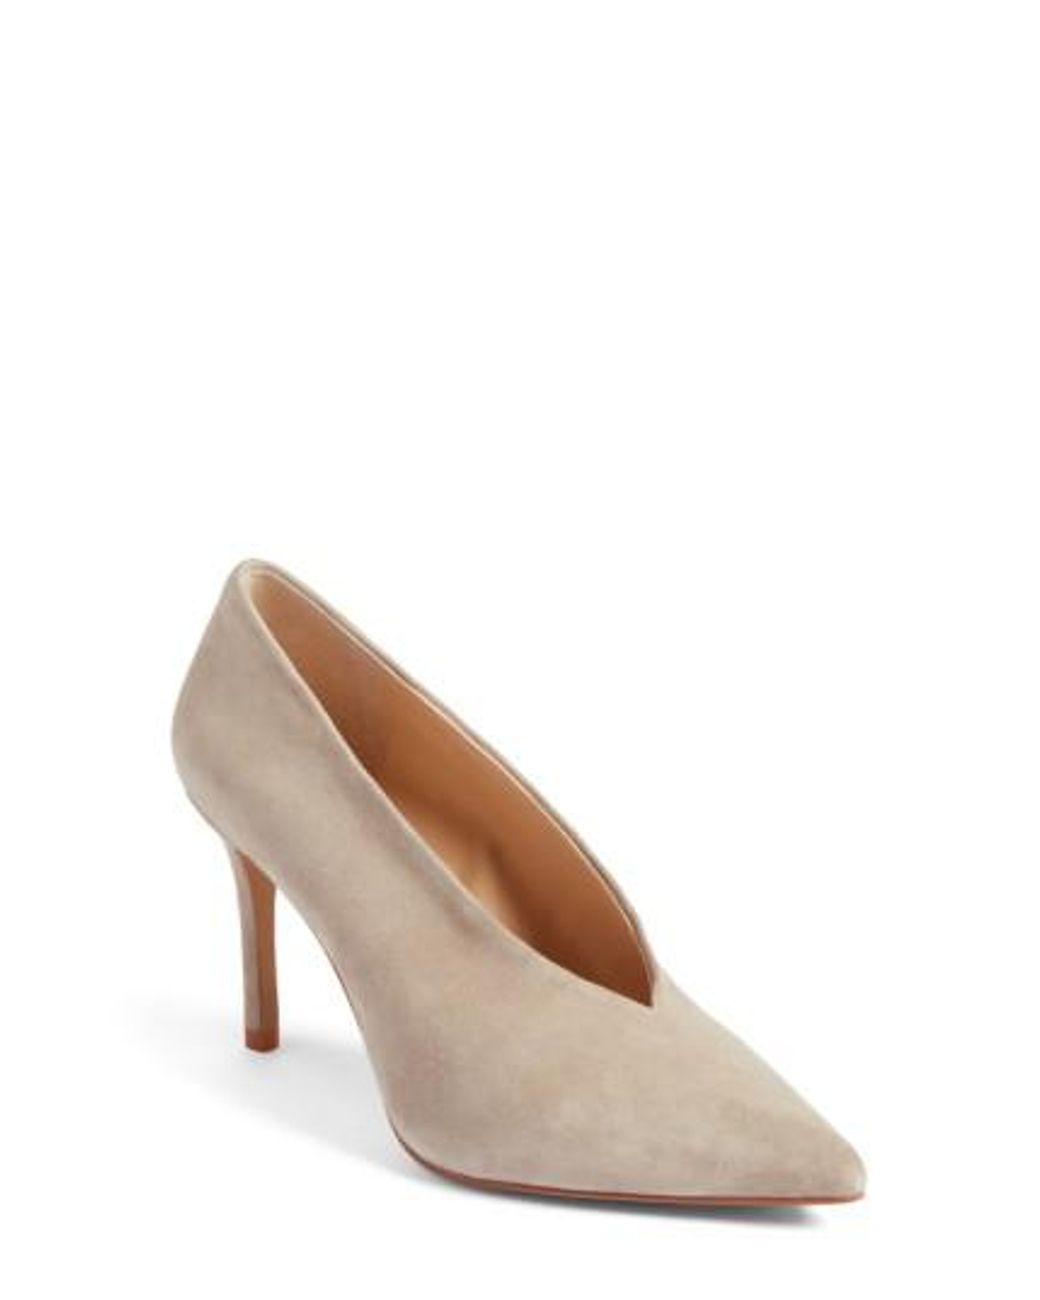 Lyst - Vince camuto Ankia Suede Pump in Brown